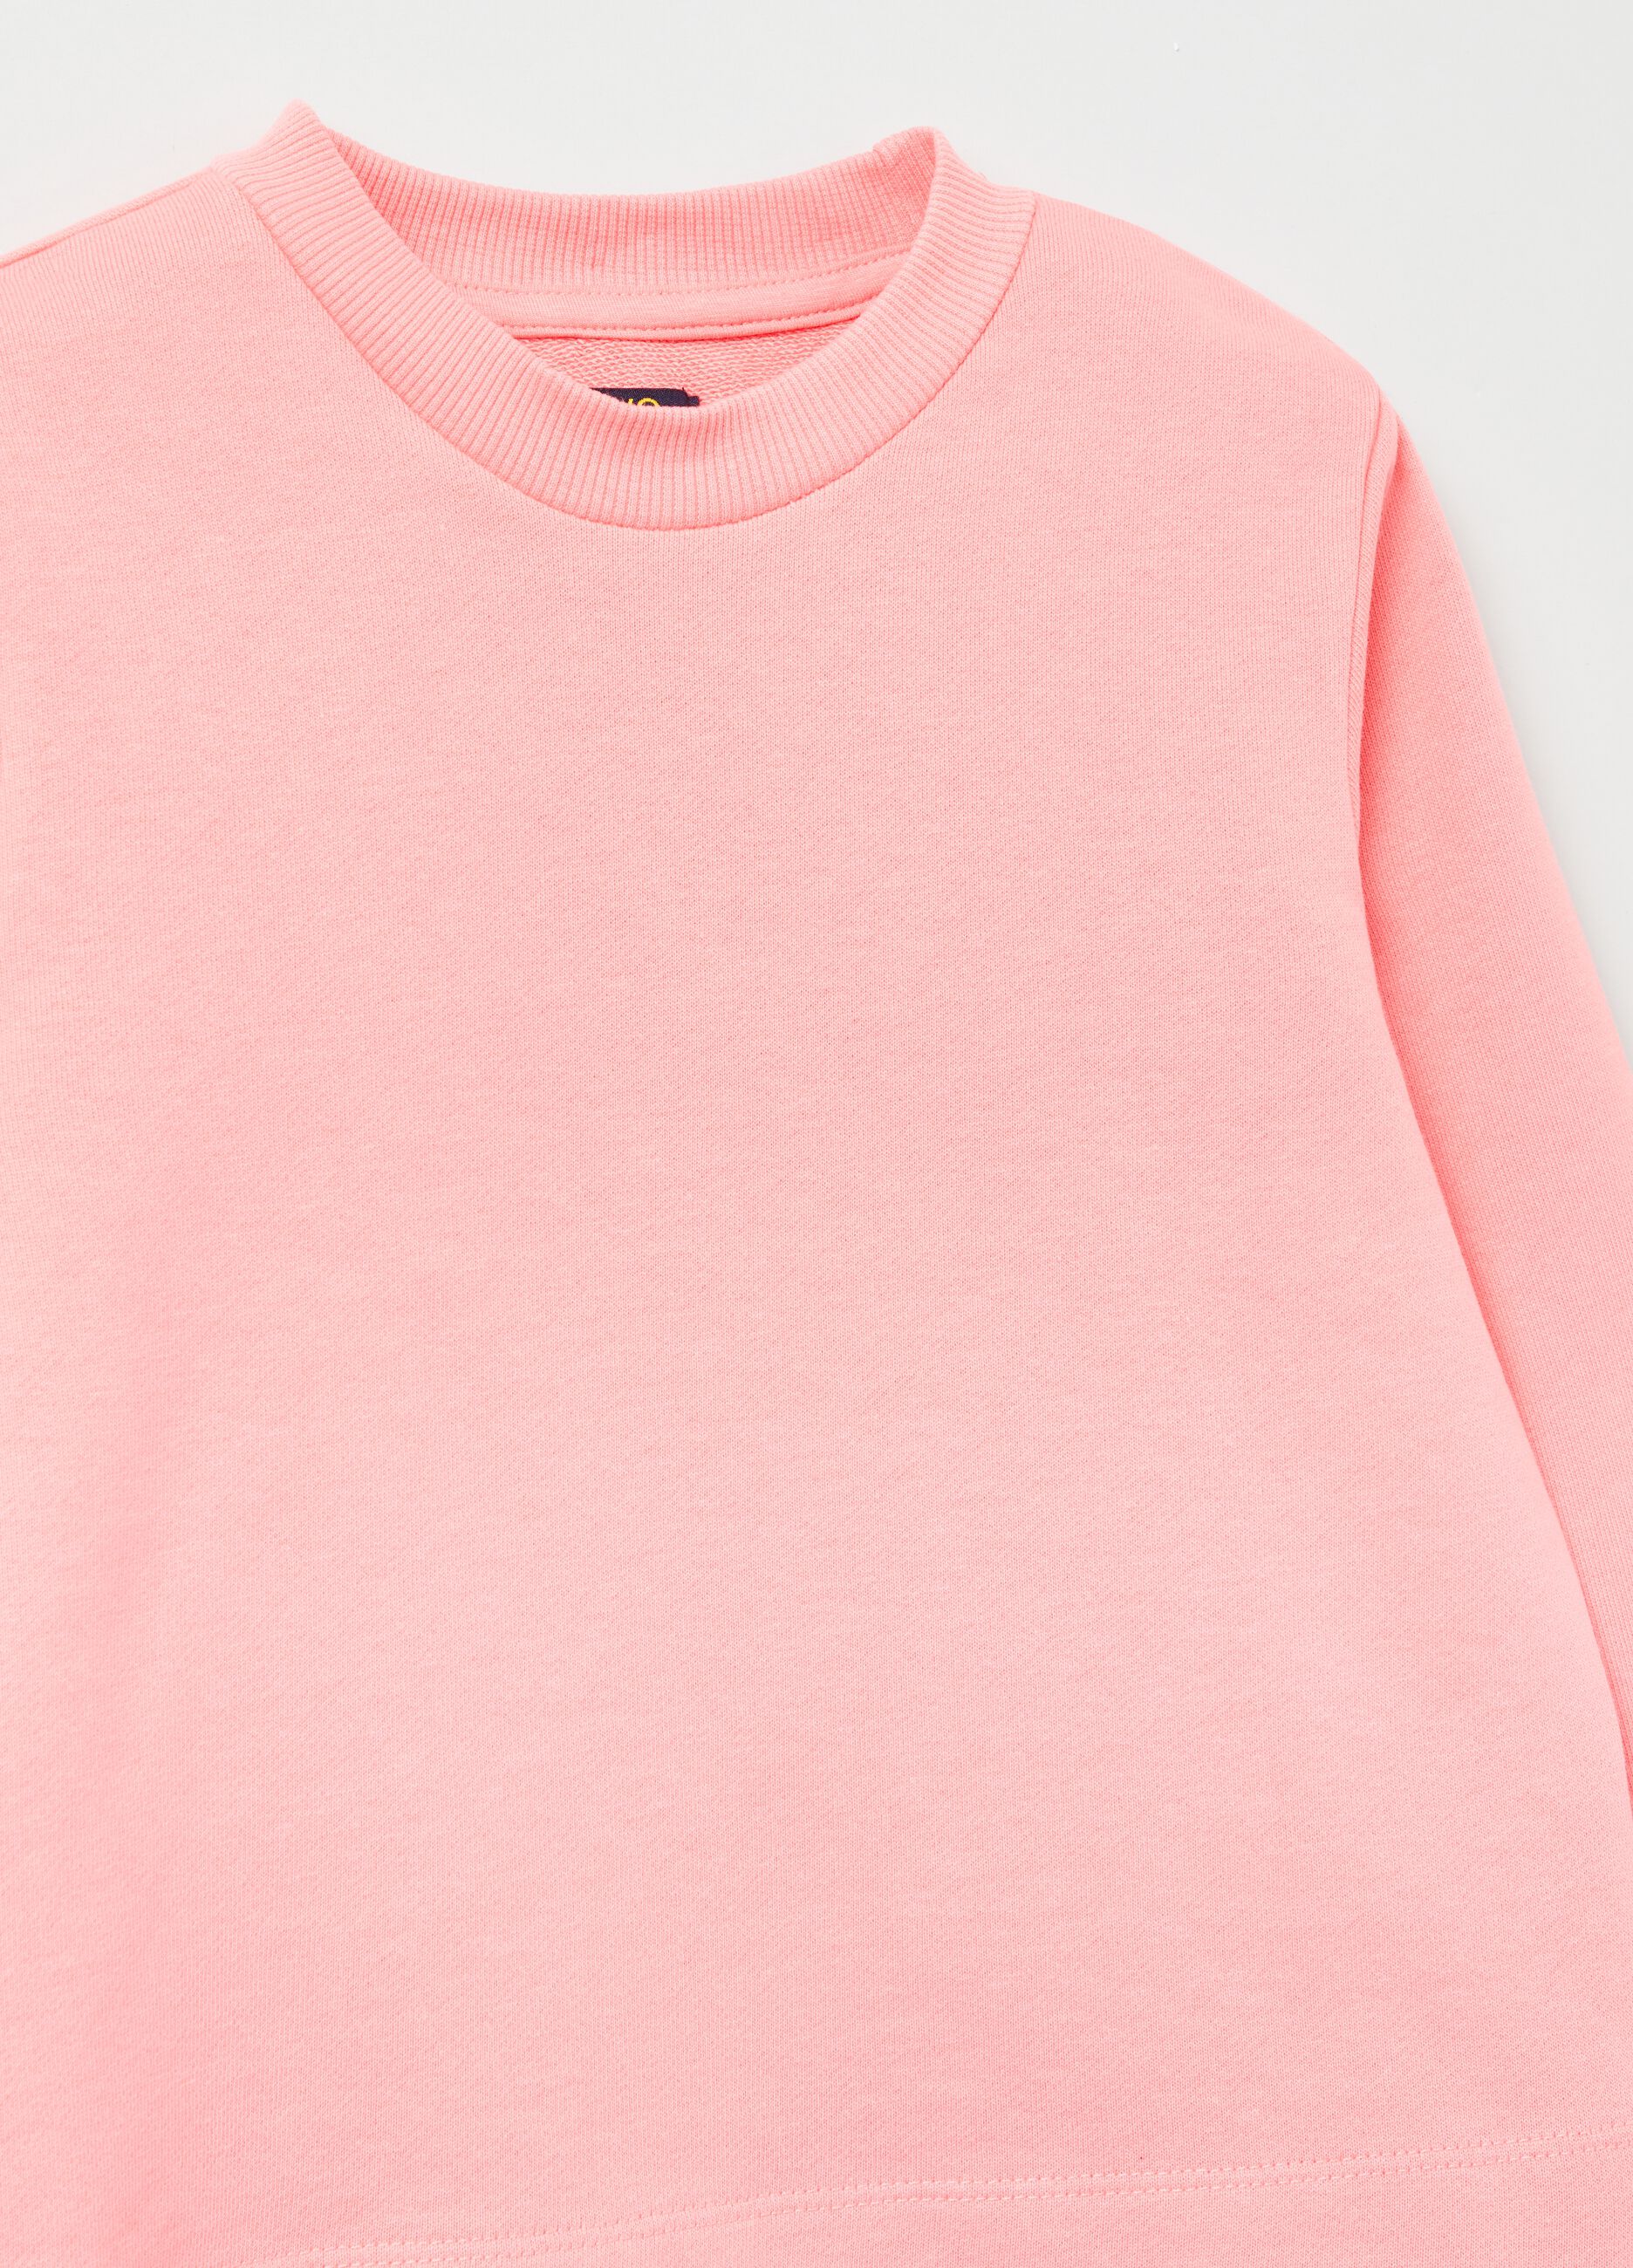 Sweatshirt in French terry with round neck